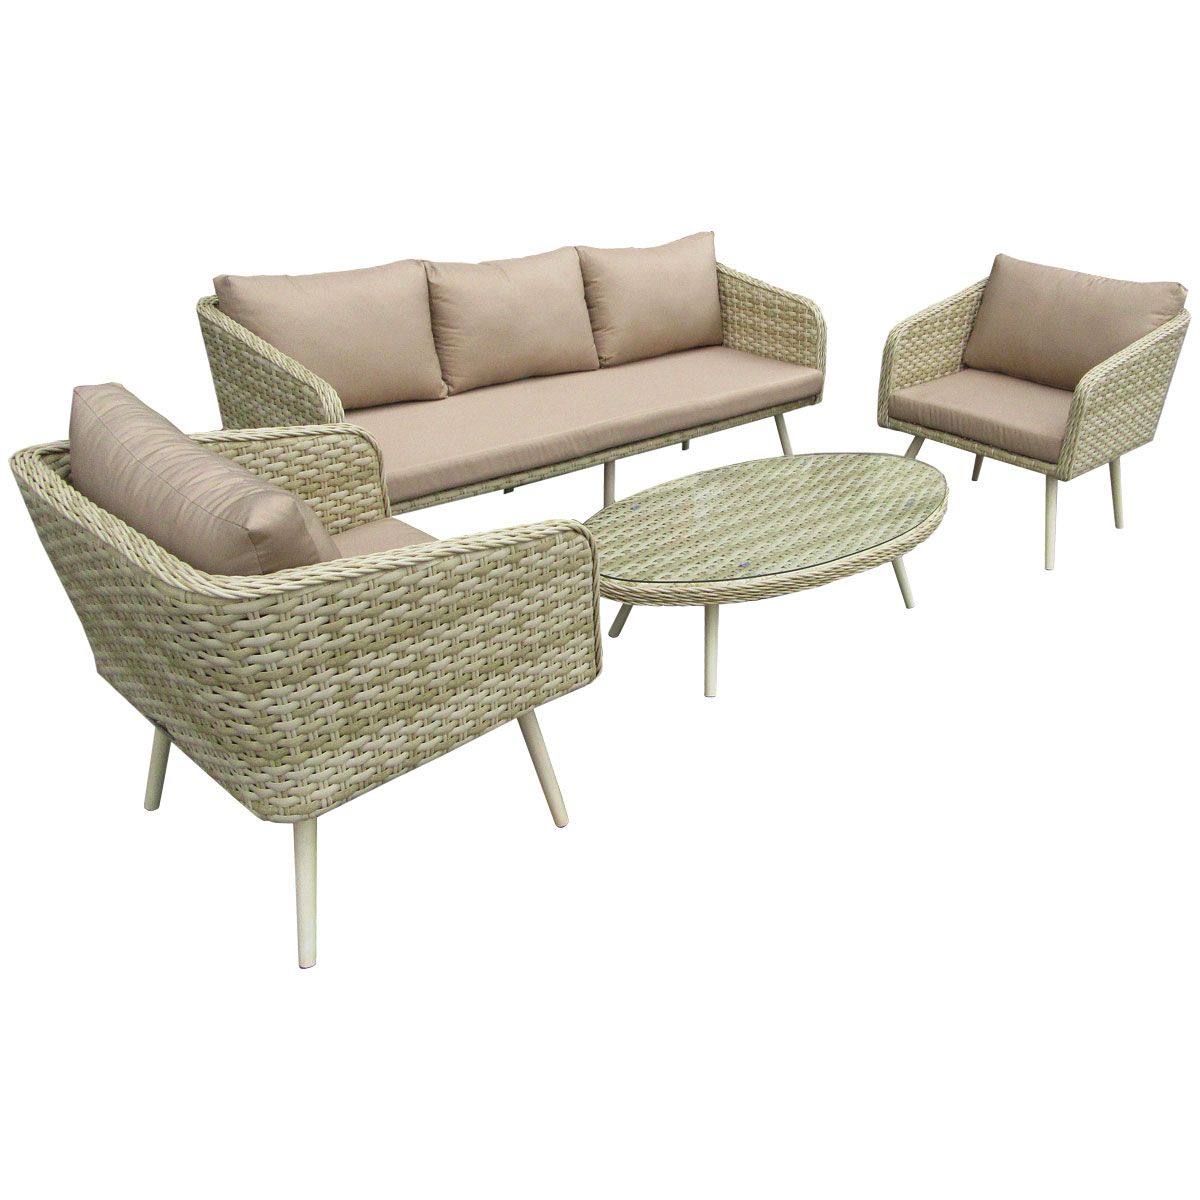 Premium Rattan Lounge Set Outdoor Garden Furniture Natural Sand In Natural Woven Modern Outdoor Chairs Sets (View 9 of 15)